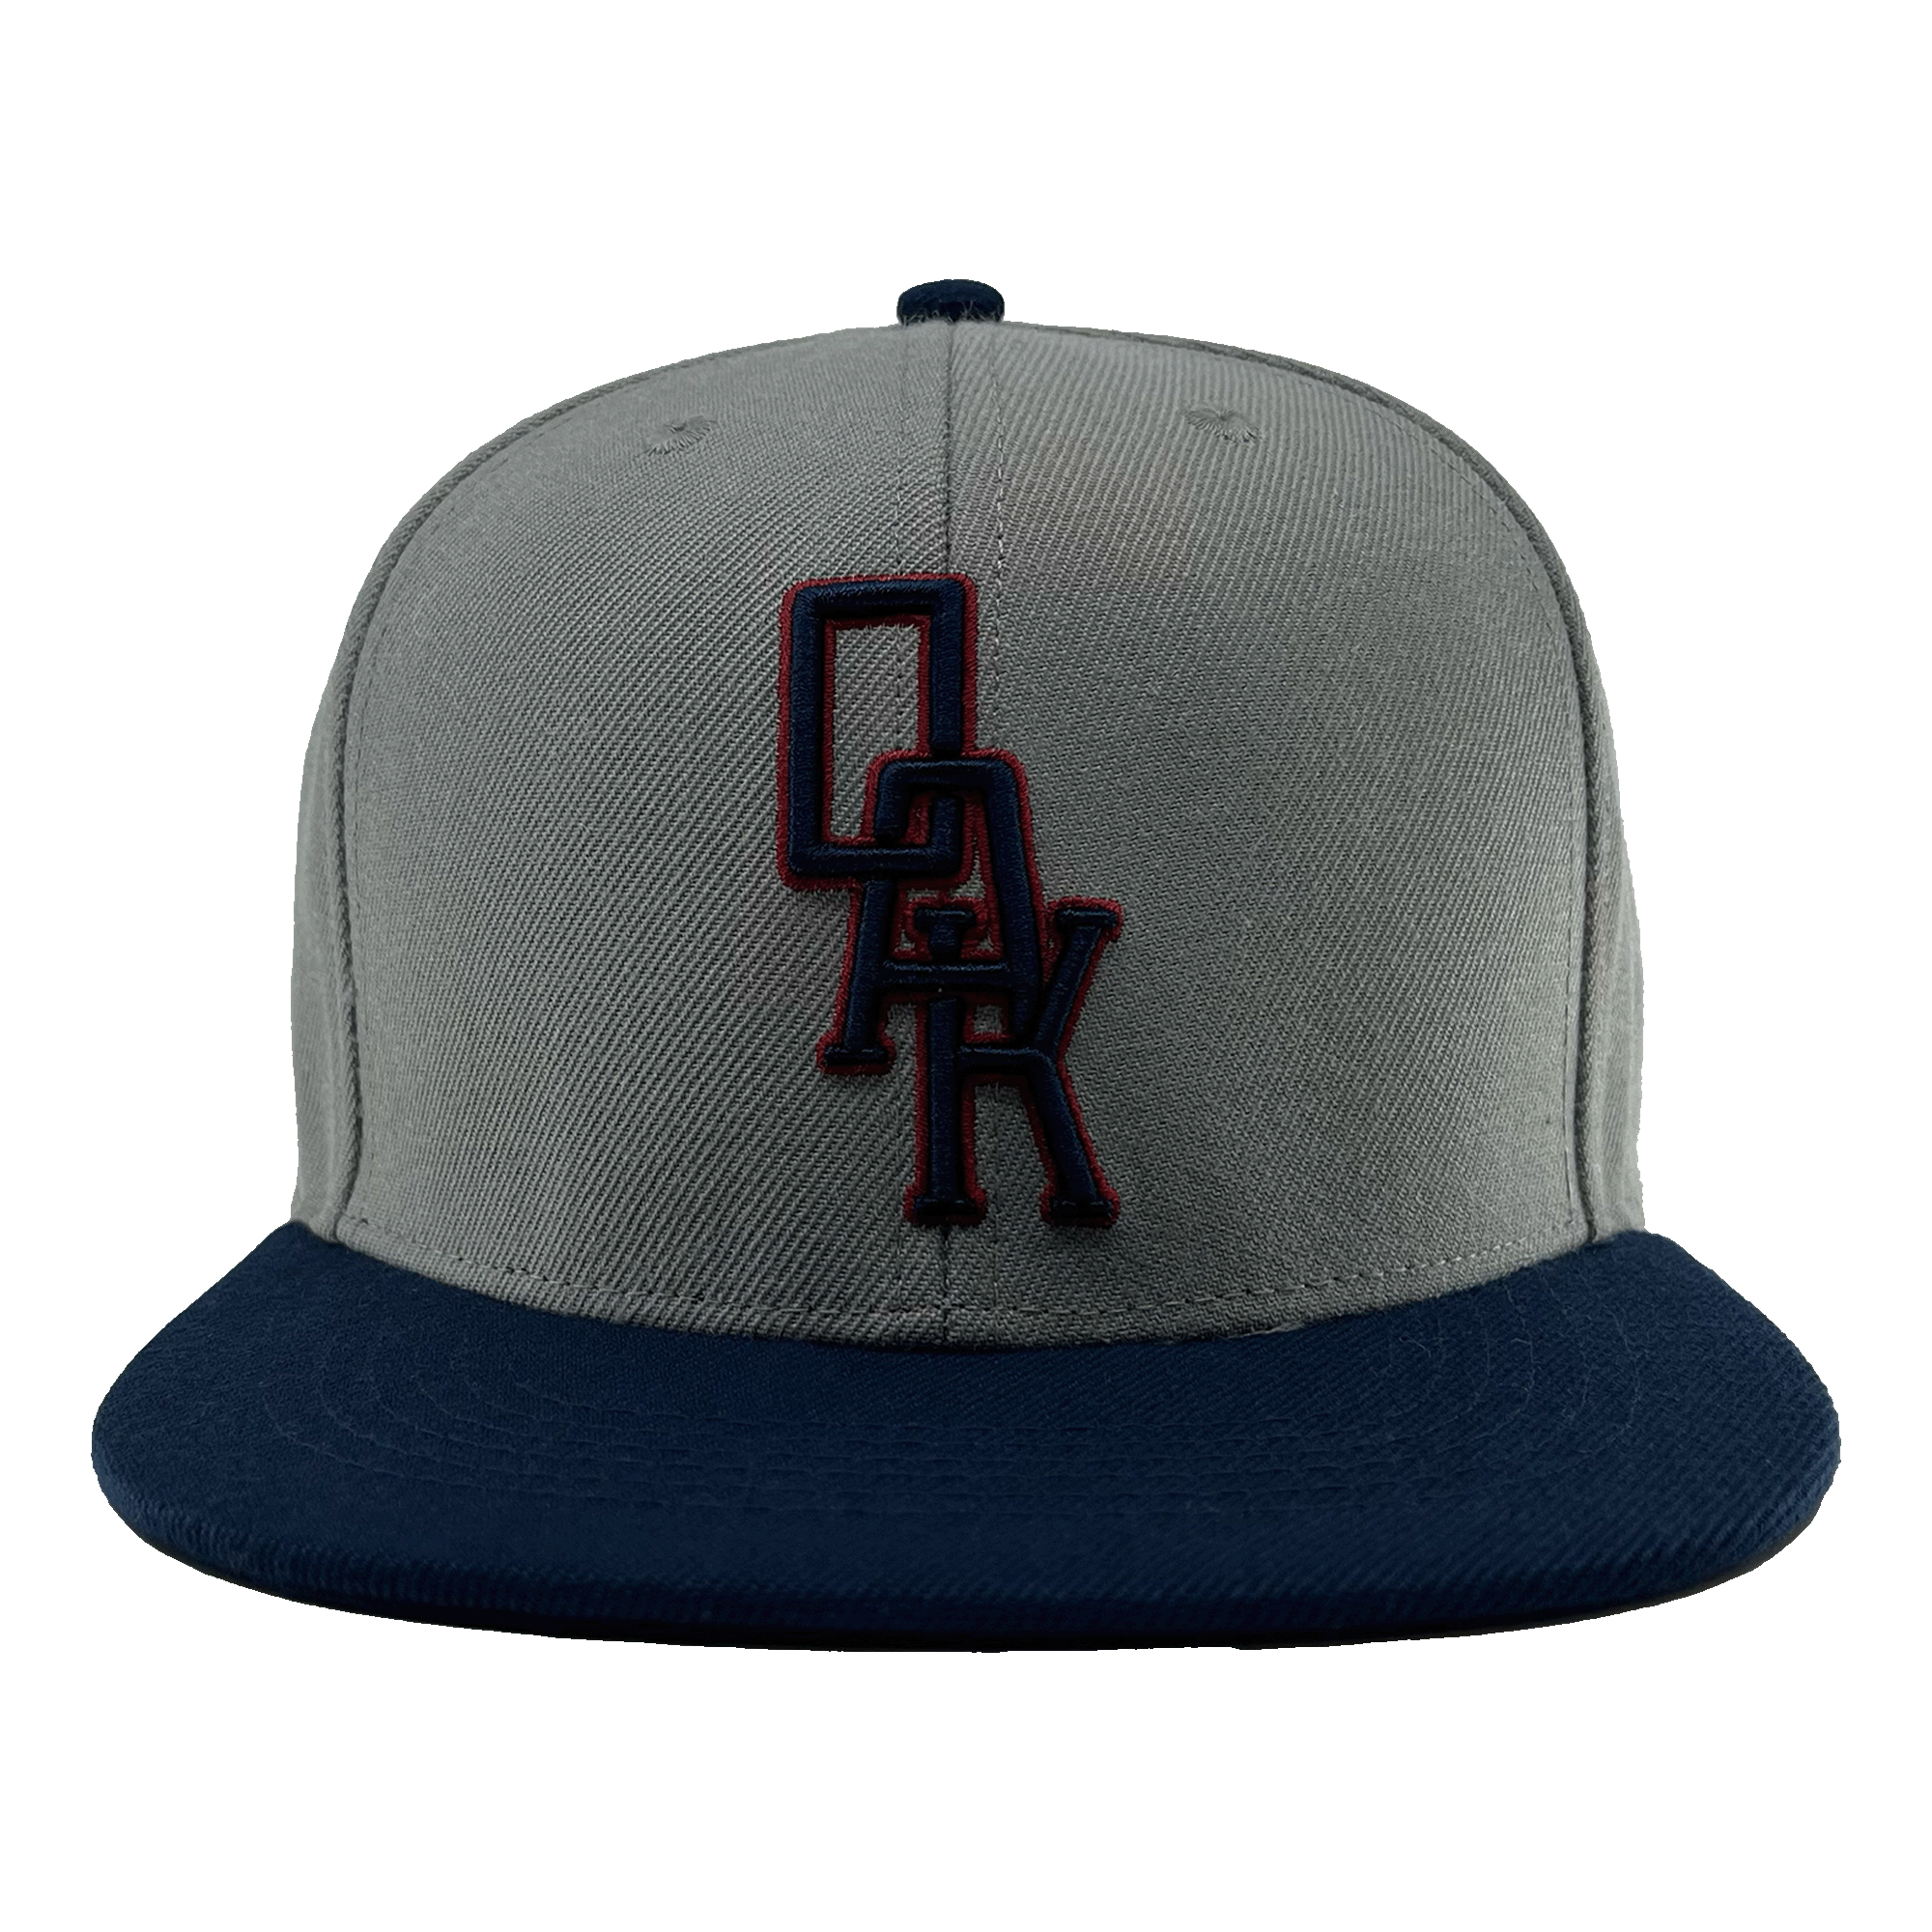 Front view of a grey hat with navy bill and navy and red embroidered OAK logo on the front crown.